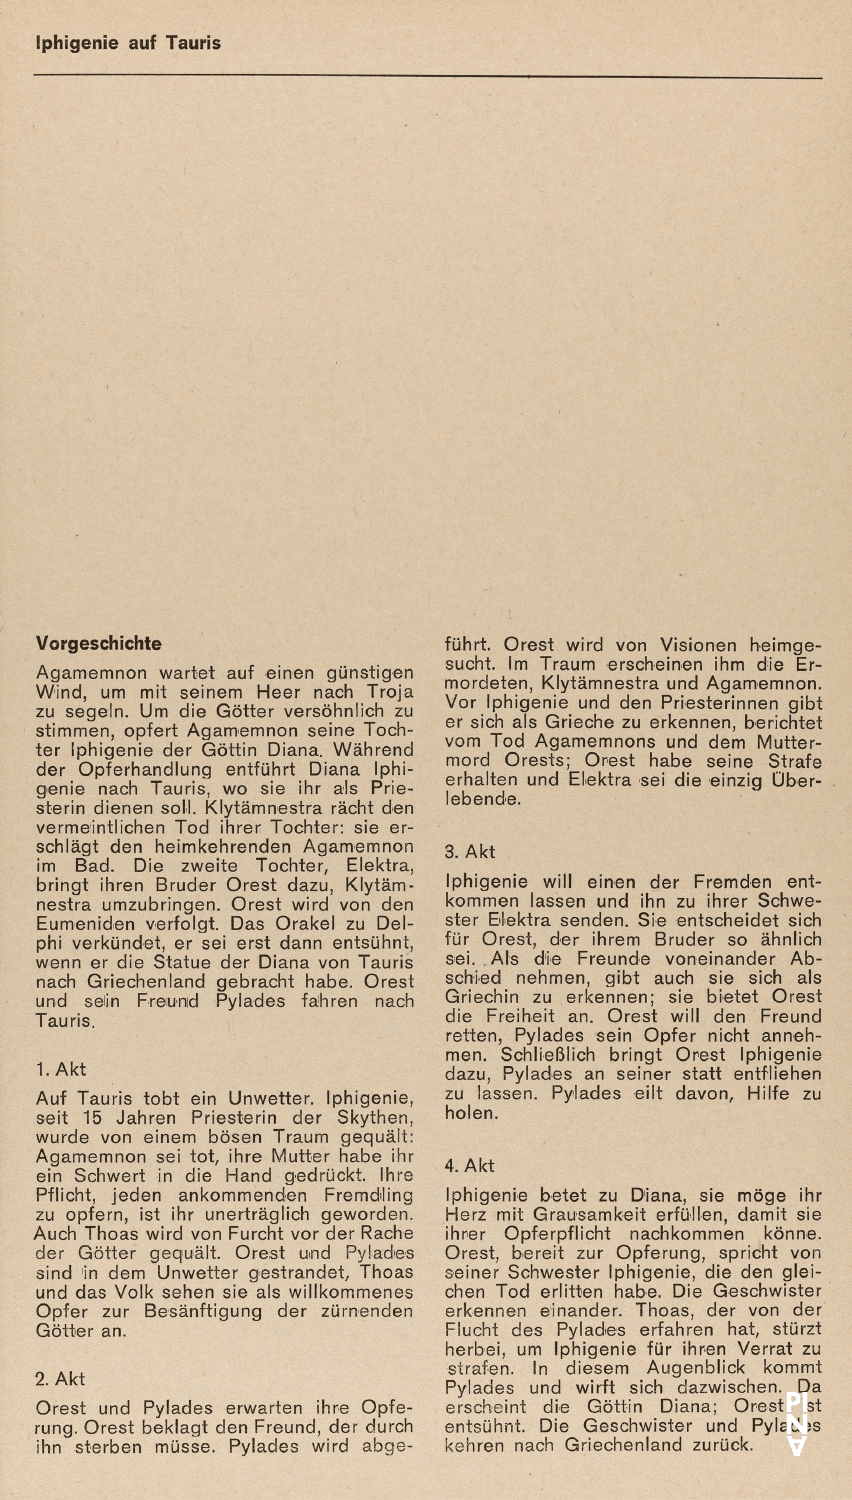 Evening leaflet for “Iphigenie auf Tauris” by Pina Bausch in in Wuppertal, season 1973/74